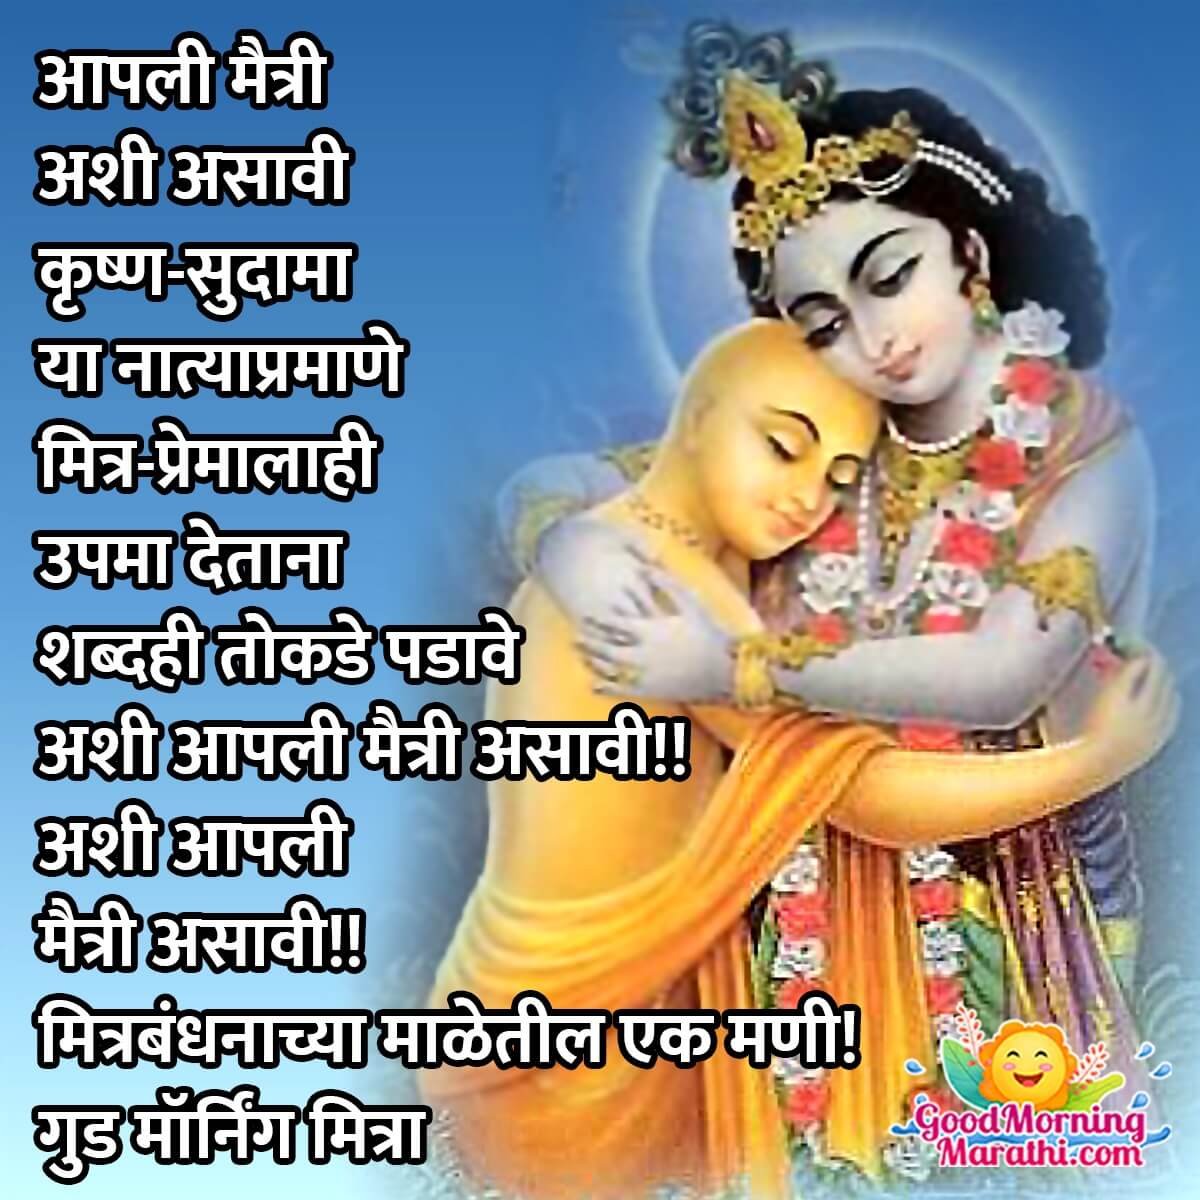 Good Morning Friendship Quotes in Marathi - Good Morning Wishes ...